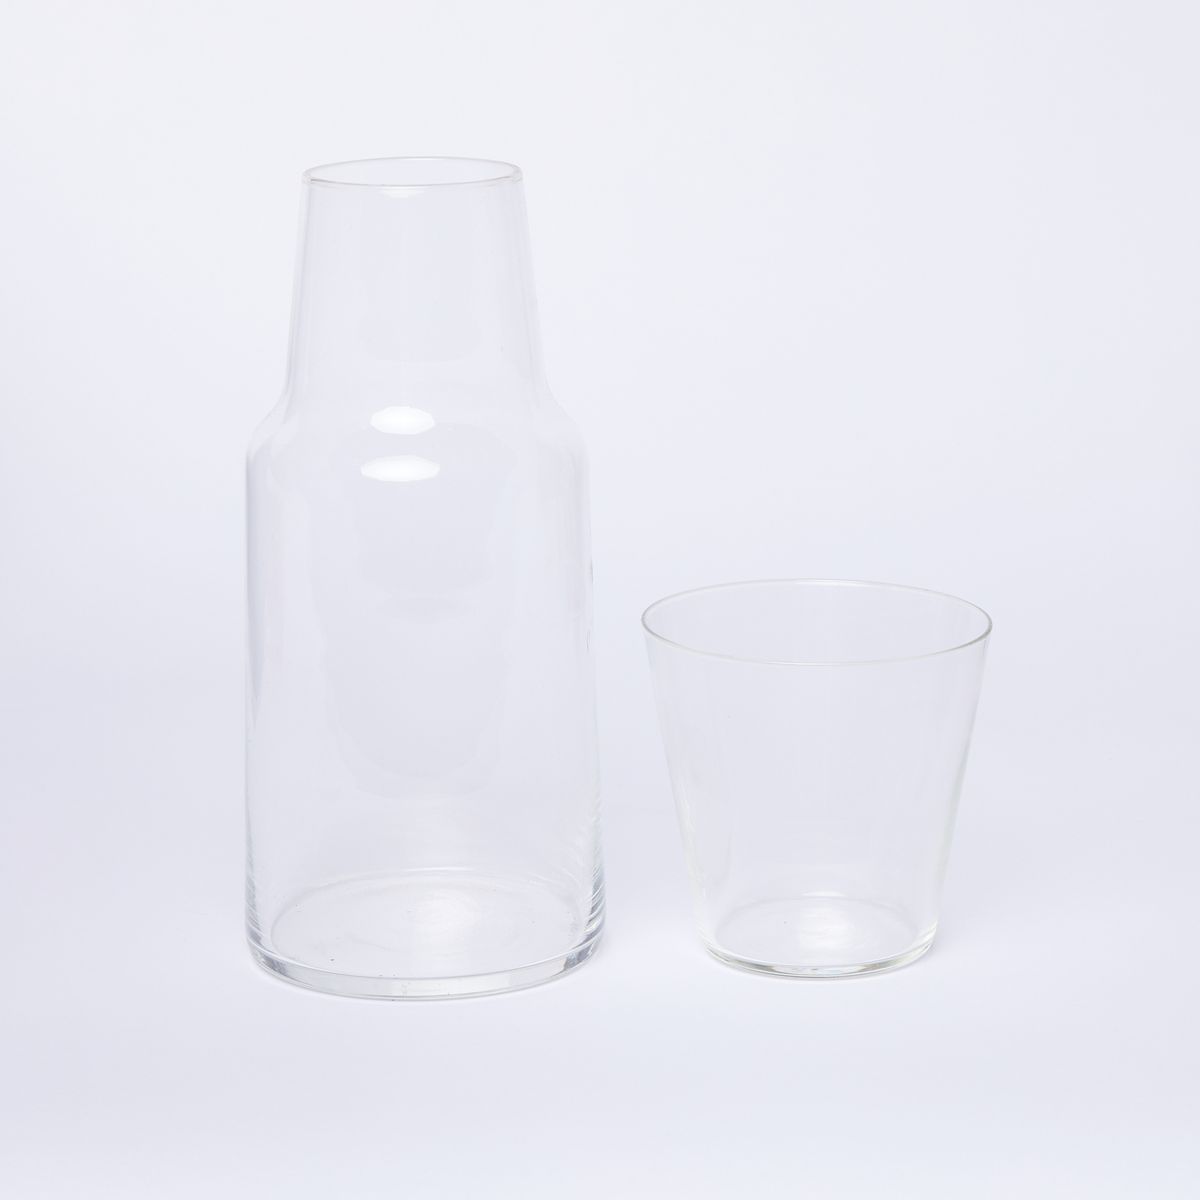 Clear glass carafe with clear glass next to it